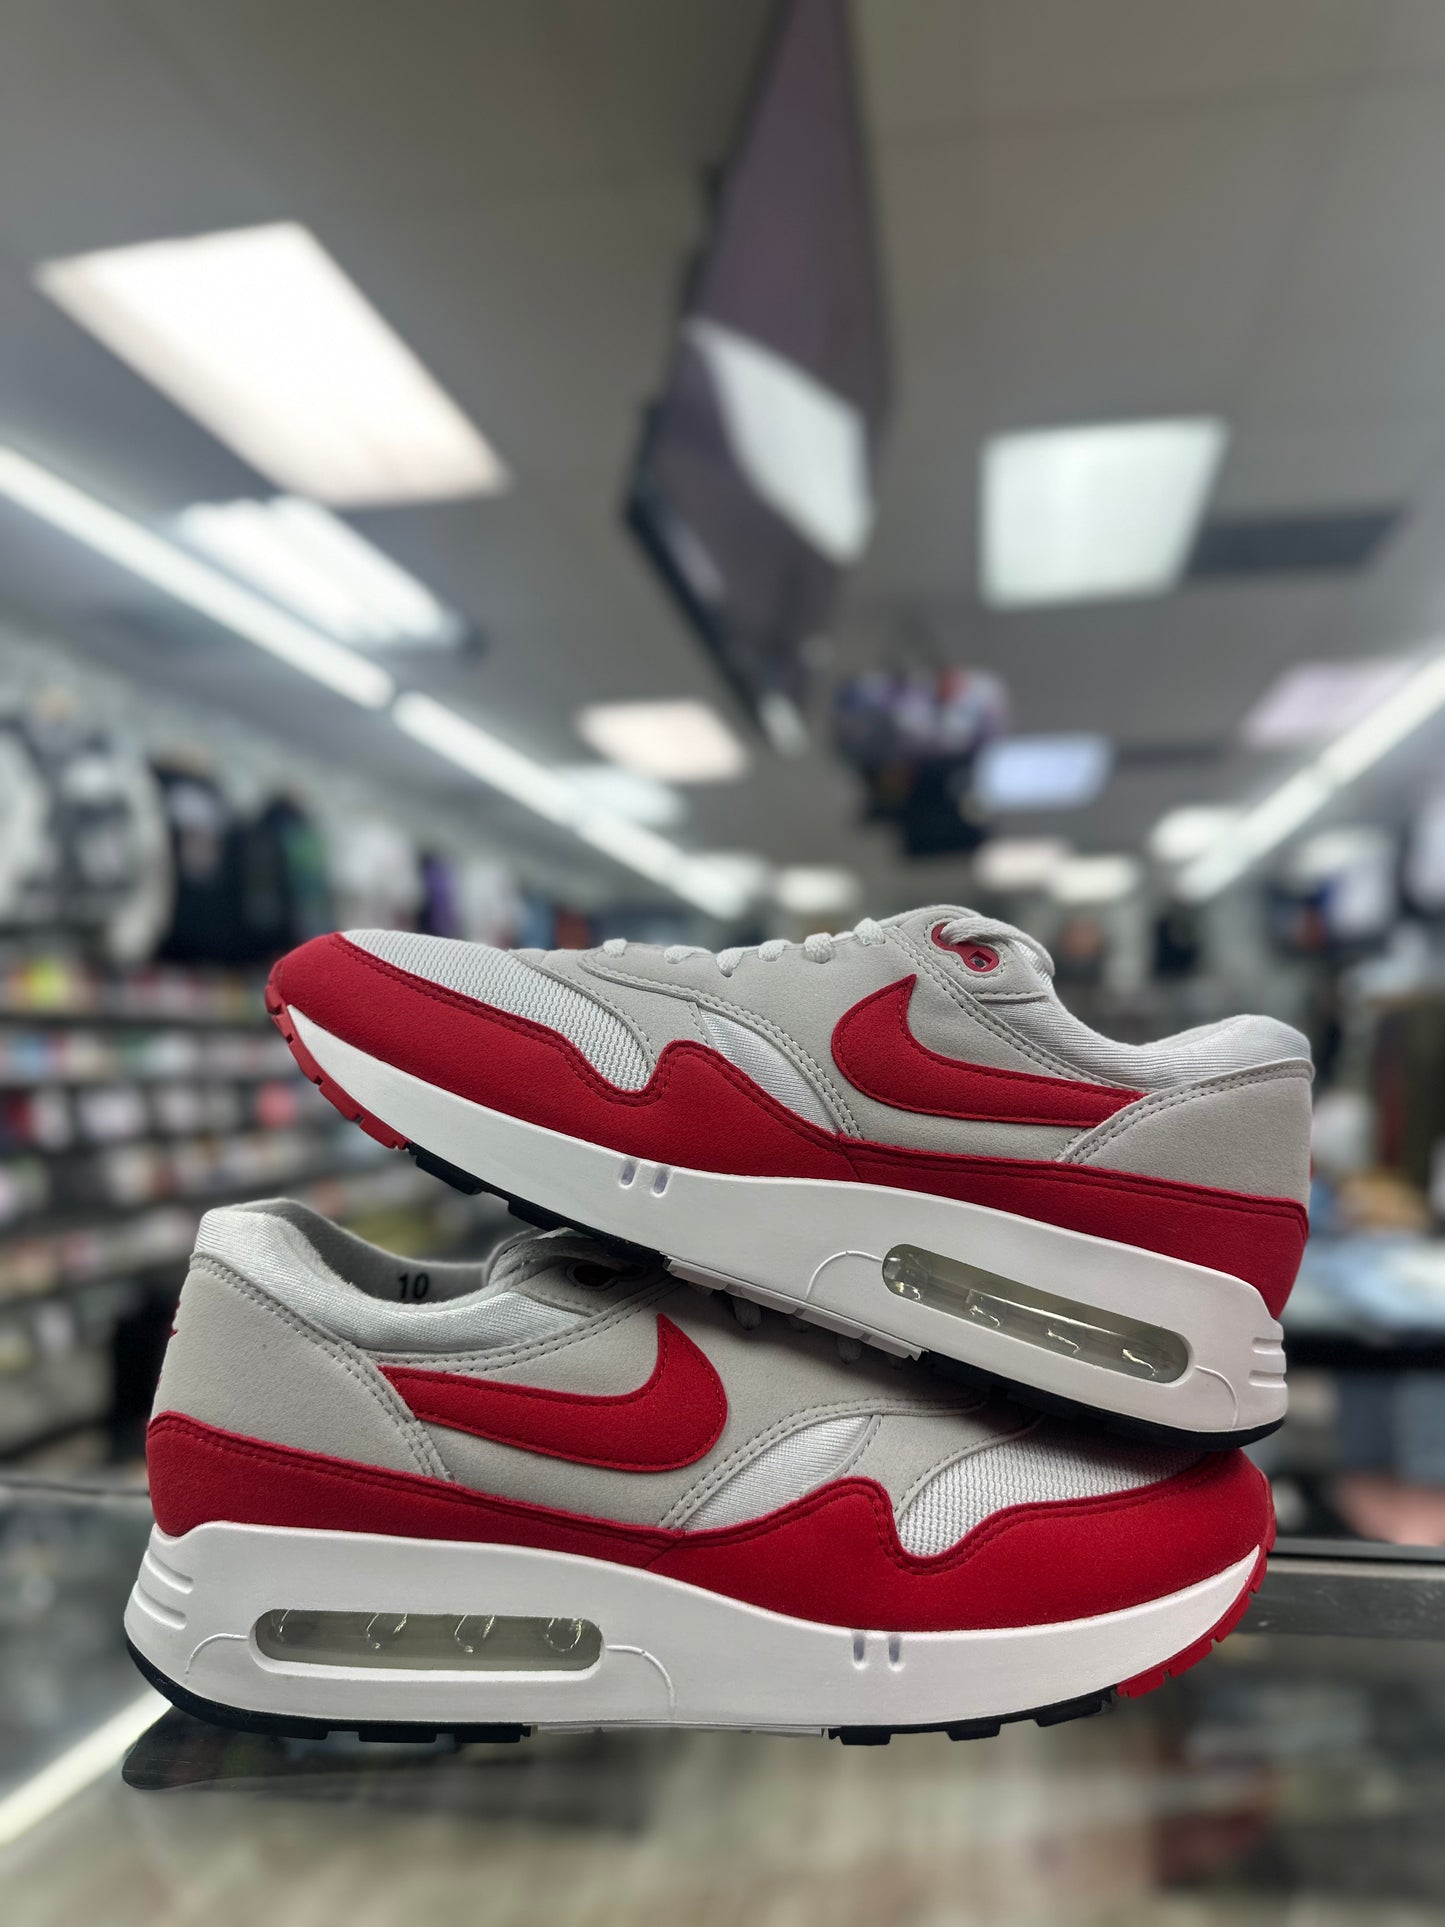 Nike Air Max 1 OG "Big Bubble Sport Red"